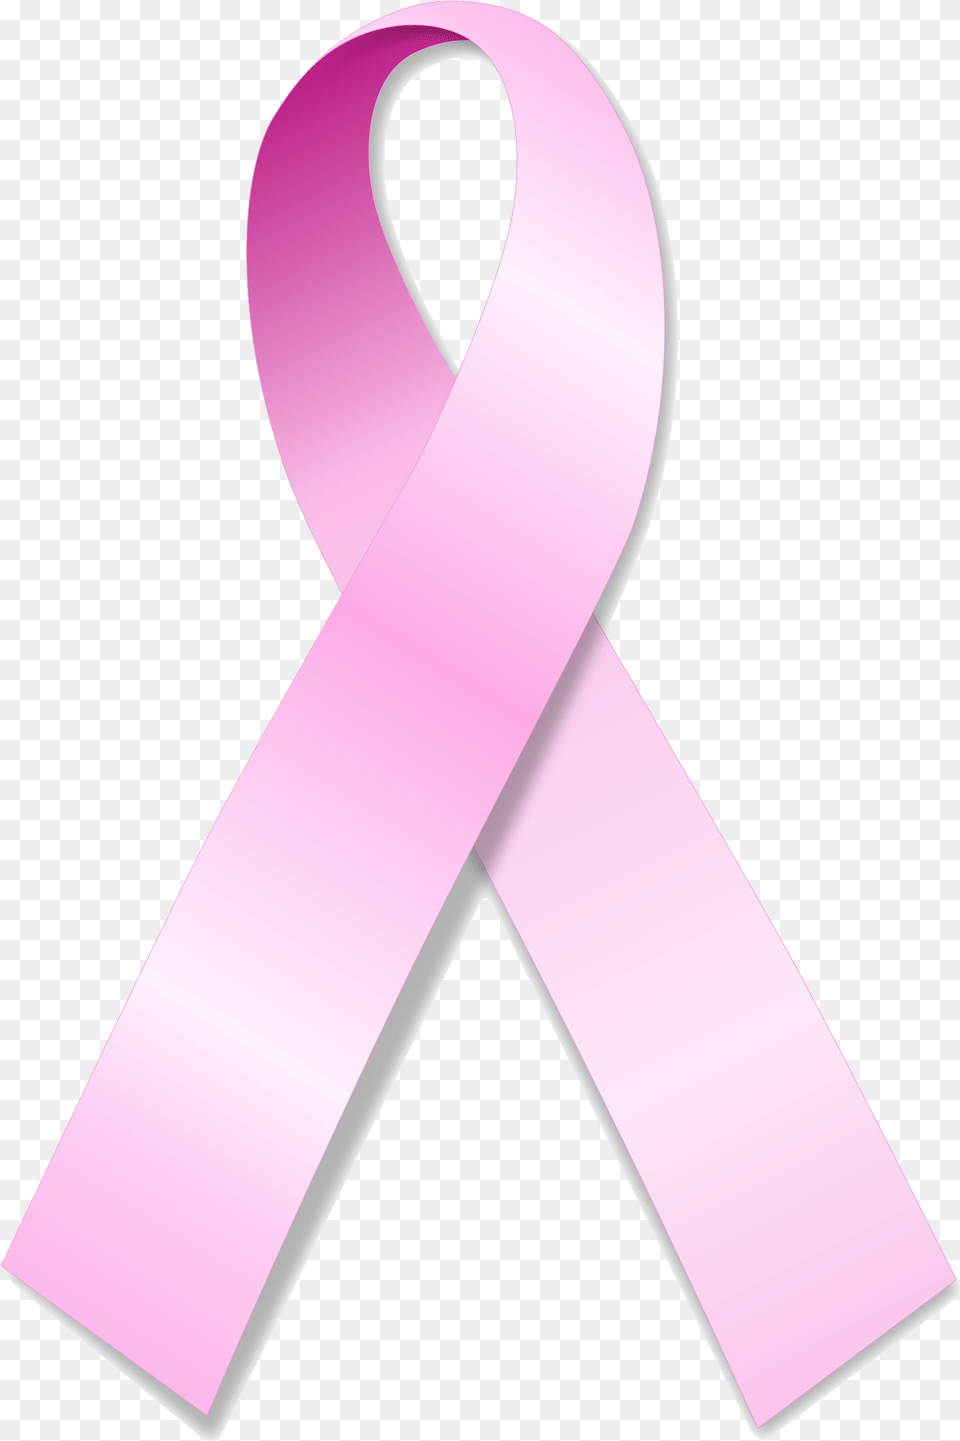 Breast Cancer Ribbon Images All Transparency, Symbol Png